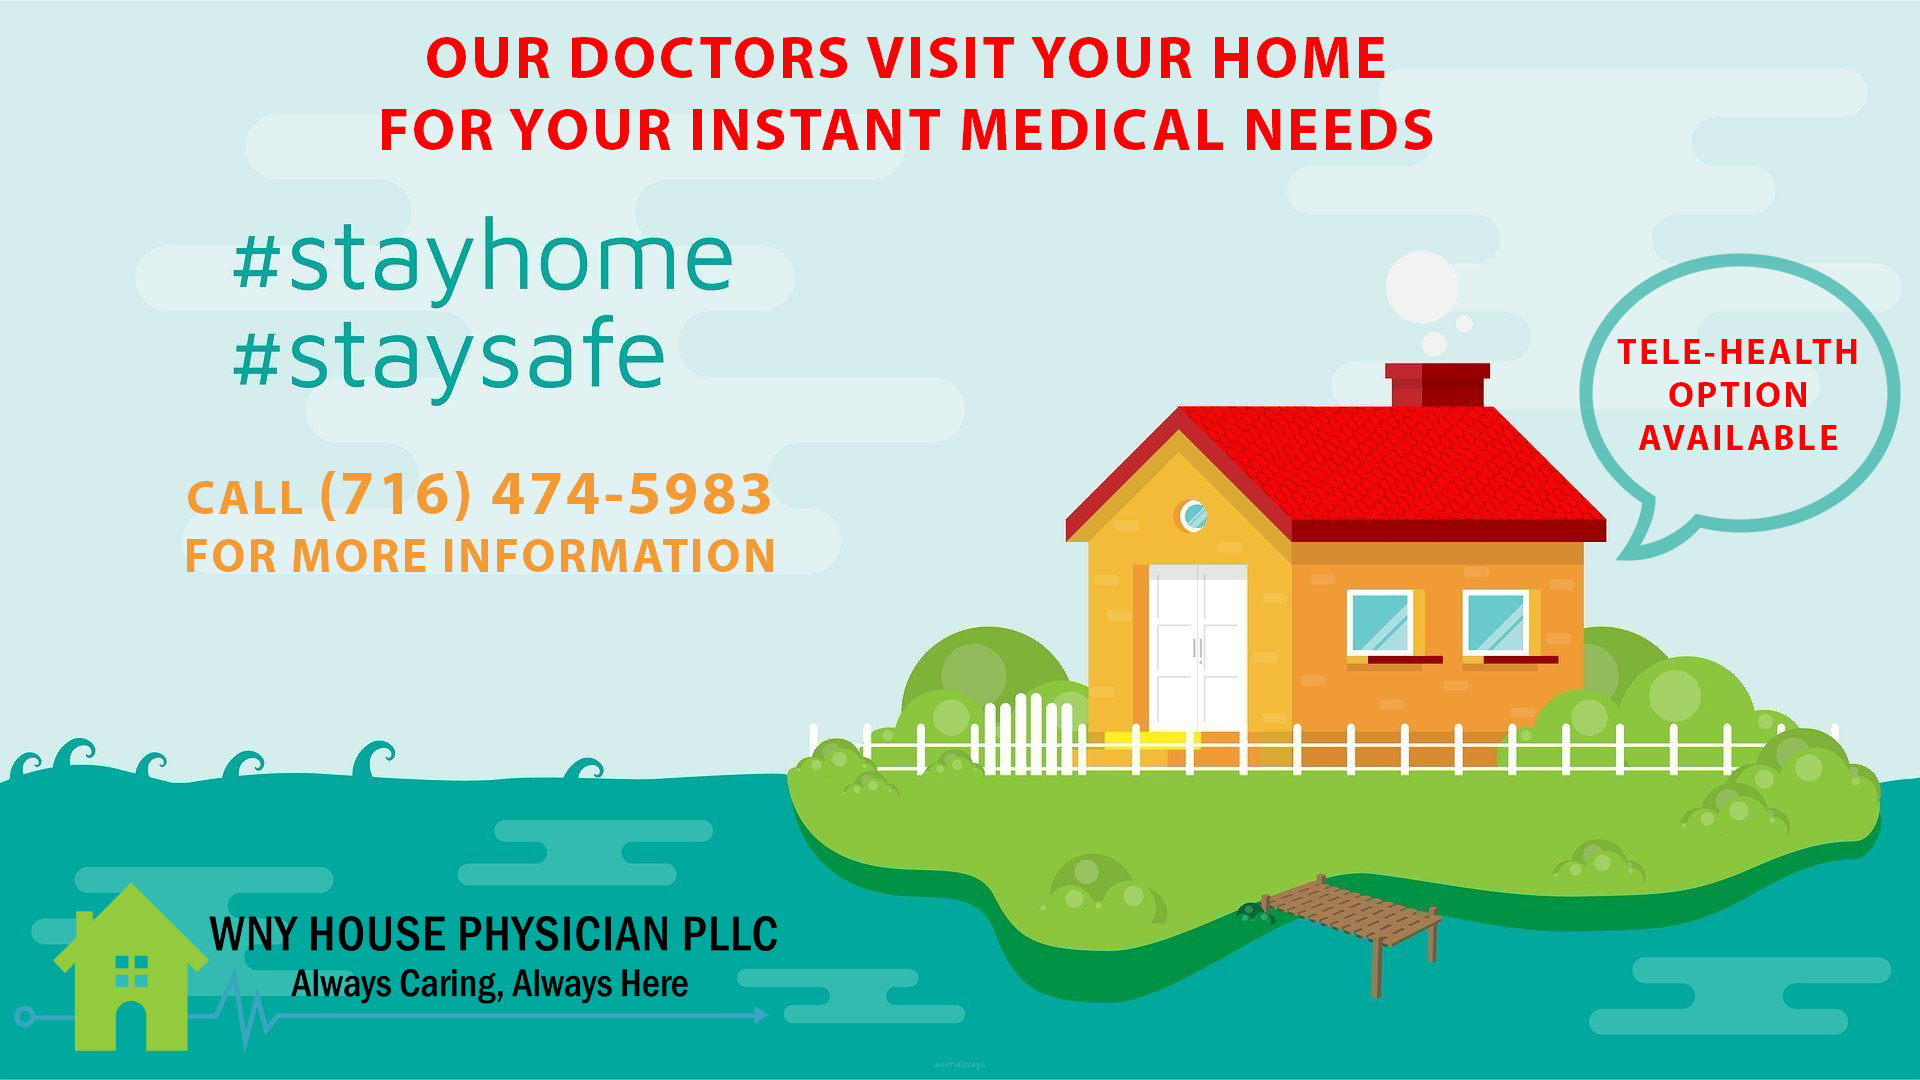 Banner-Extra | Care at Home, Medical House Calls in Buffalo, On-Demand Doctor, House Call Services, Online Medical Care, house calls physicians, house call doctor, online doctor visit, home visit doctor, home doctor near me, house call doctors near me, home visit doctors near me, doctors visit, doctors that make house calls, house call physicians near me, doctors that come to your home, at home doctor near me, doctor on call near me, family medicine doctor, virtual dr visit, visiting doctors near me, virtual primary care doctor, doctors accepting new patients, best primary care doctors near me, top primary care physicians near me, Sick Visits